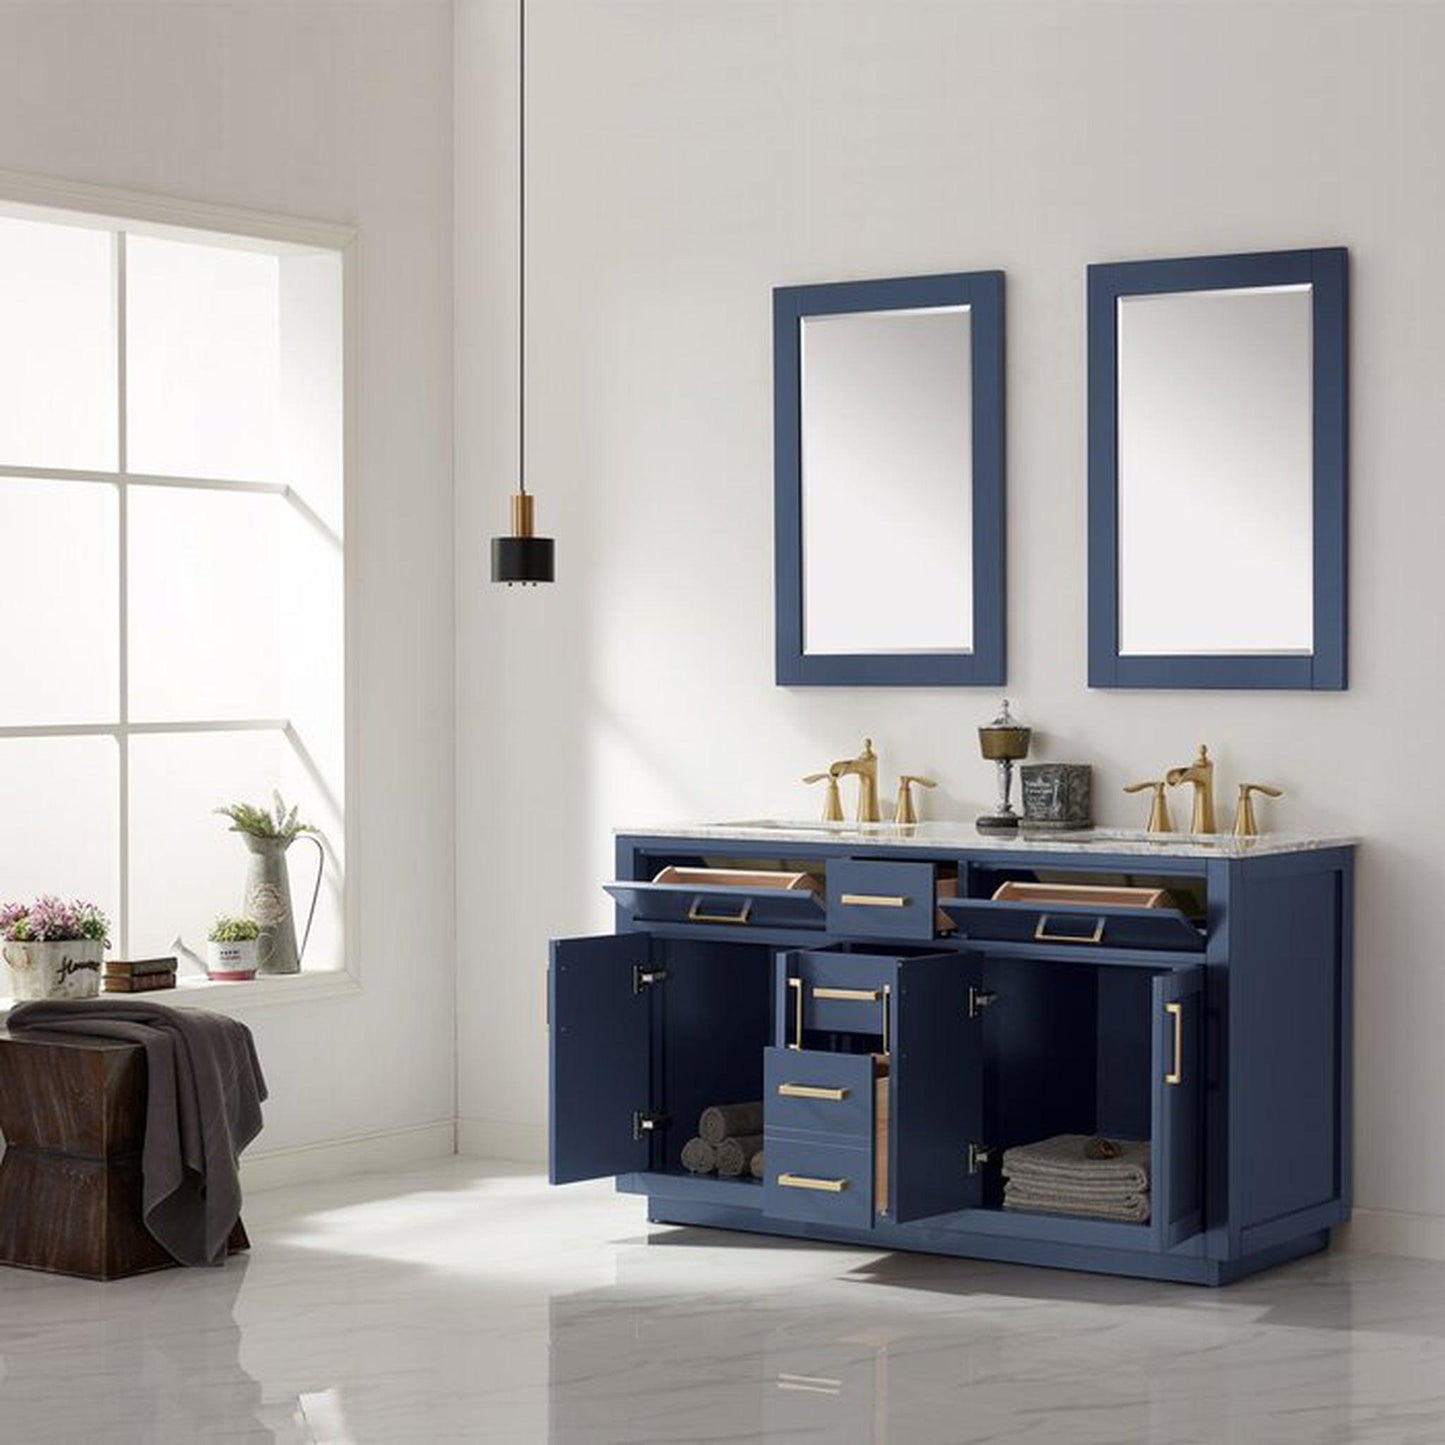 Altair Ivy 60" Royal Blue Freestanding Double Bathroom Vanity Base With Mirror